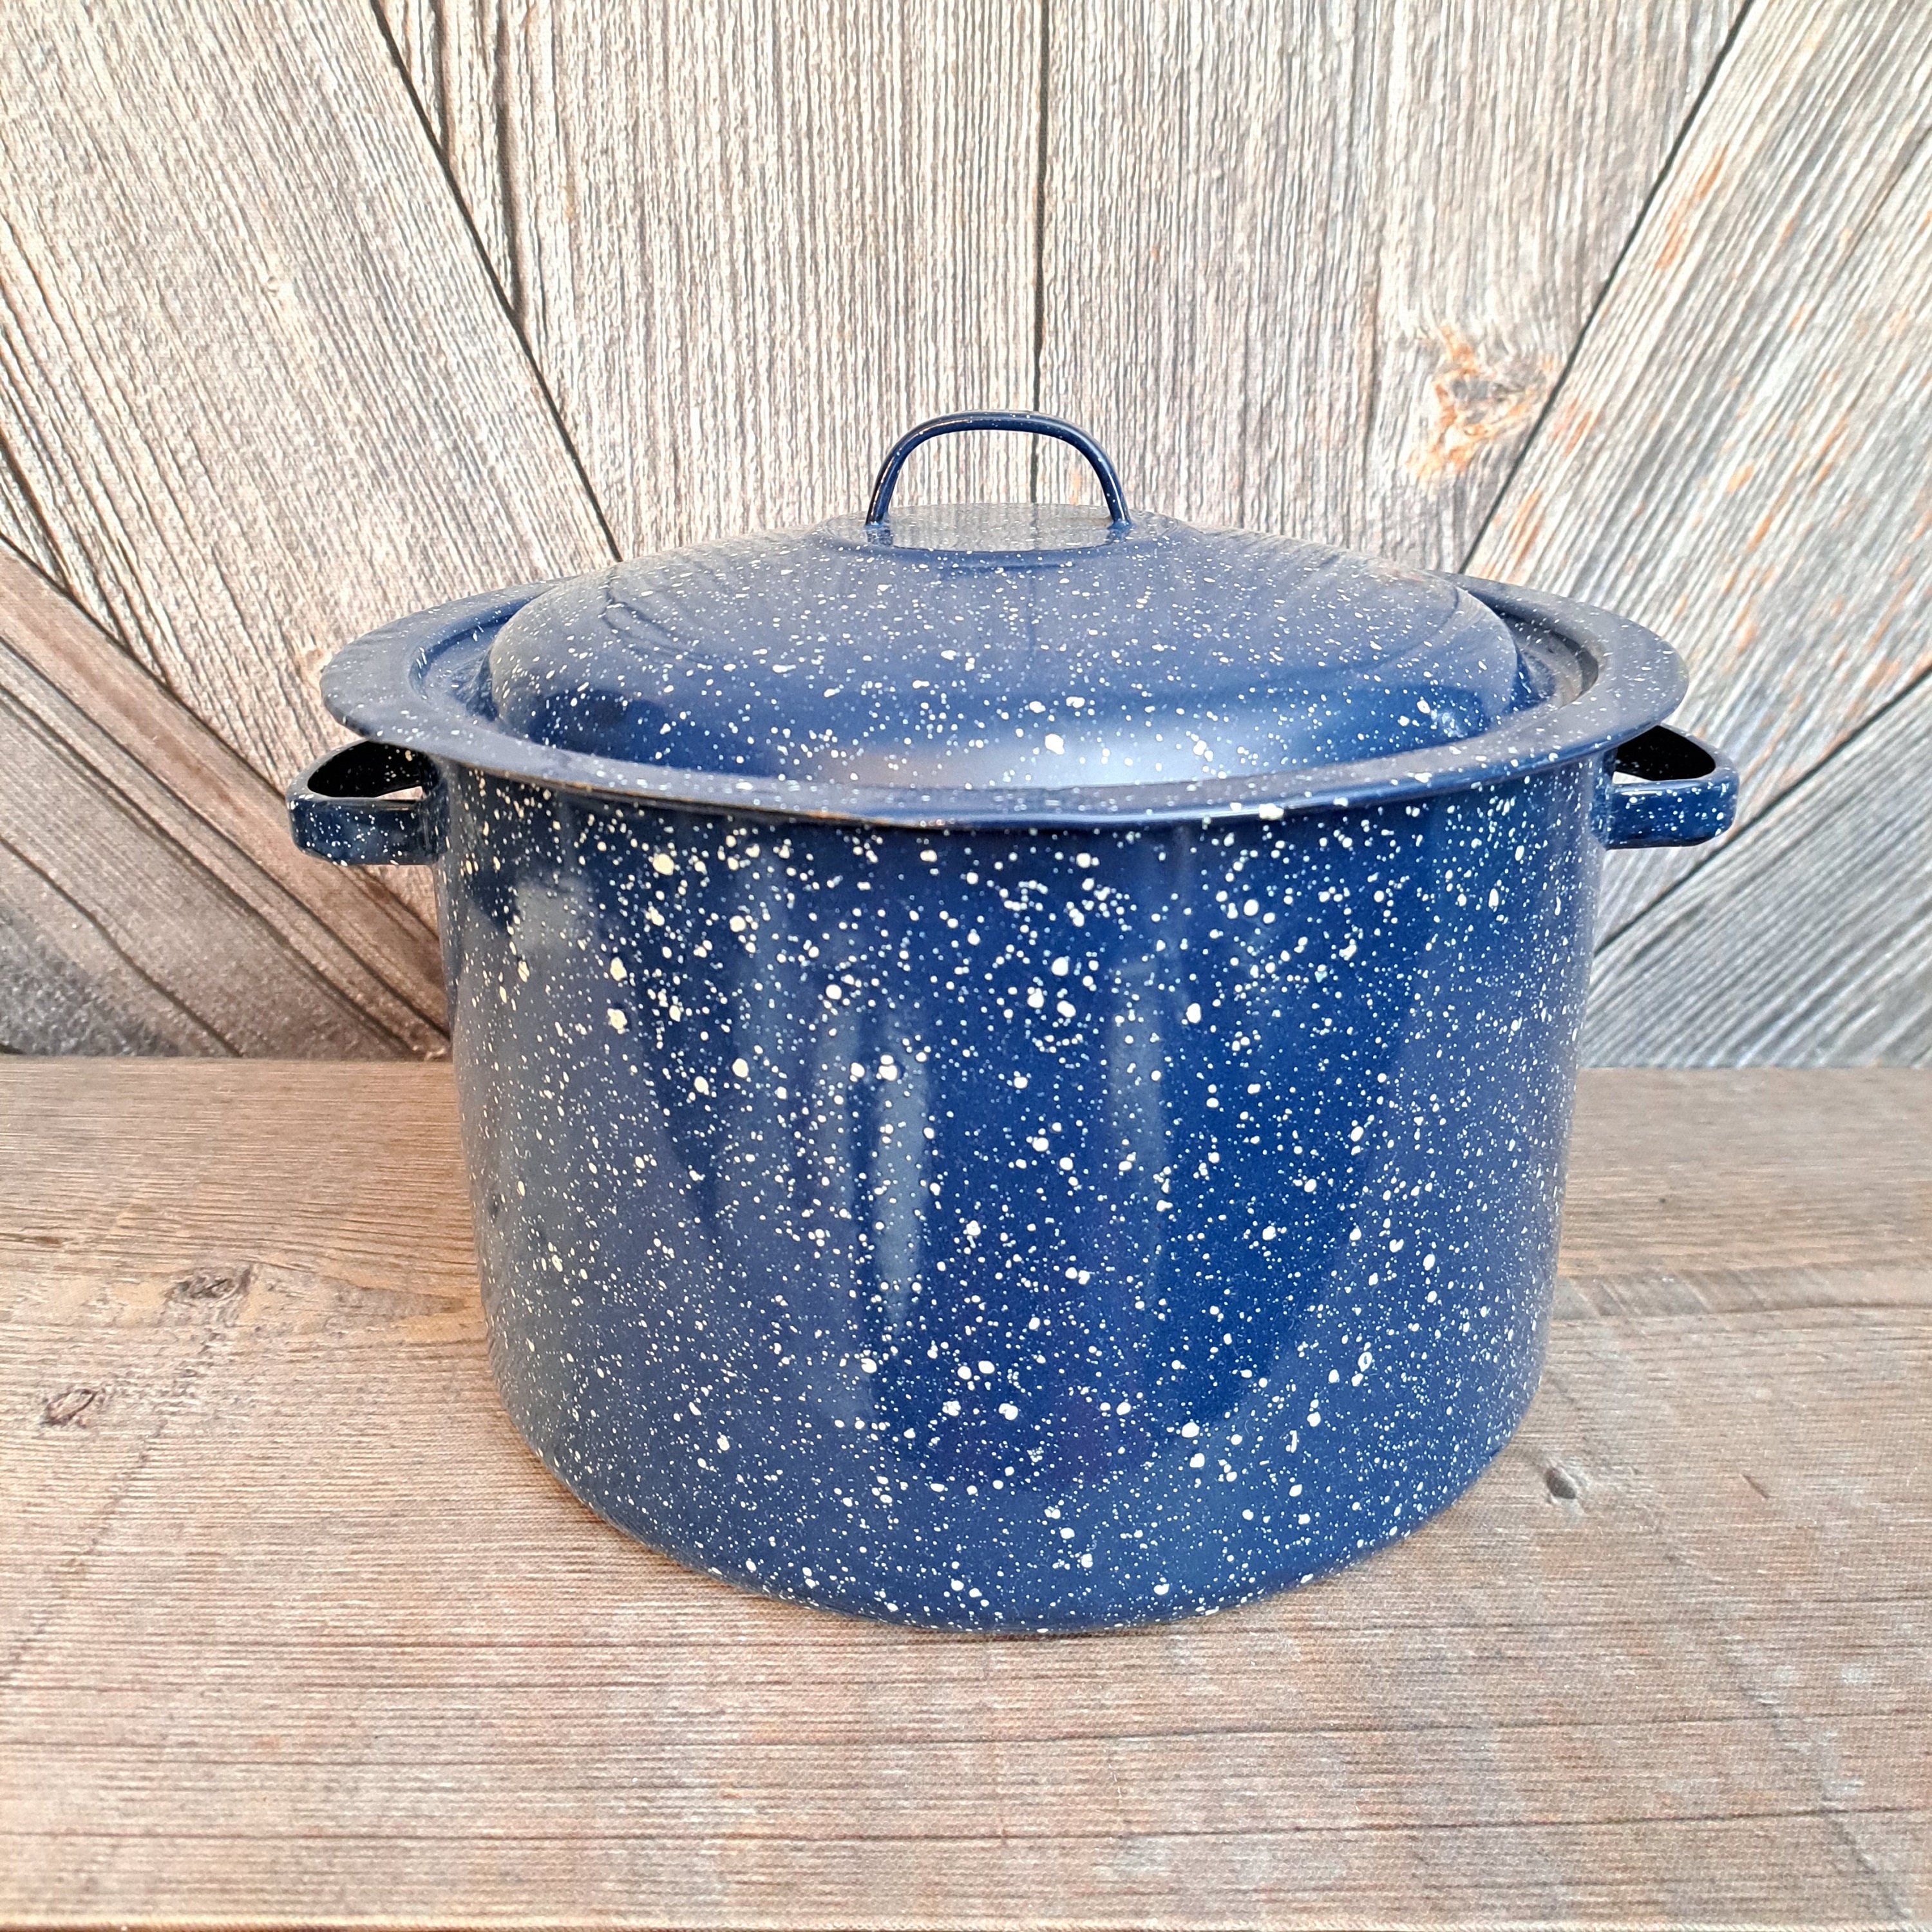 1L Flower Enamel Stock Pot with Lid Large Cooking Pot Flat Bottom Stew Pot  for Soup, Stew, Canning